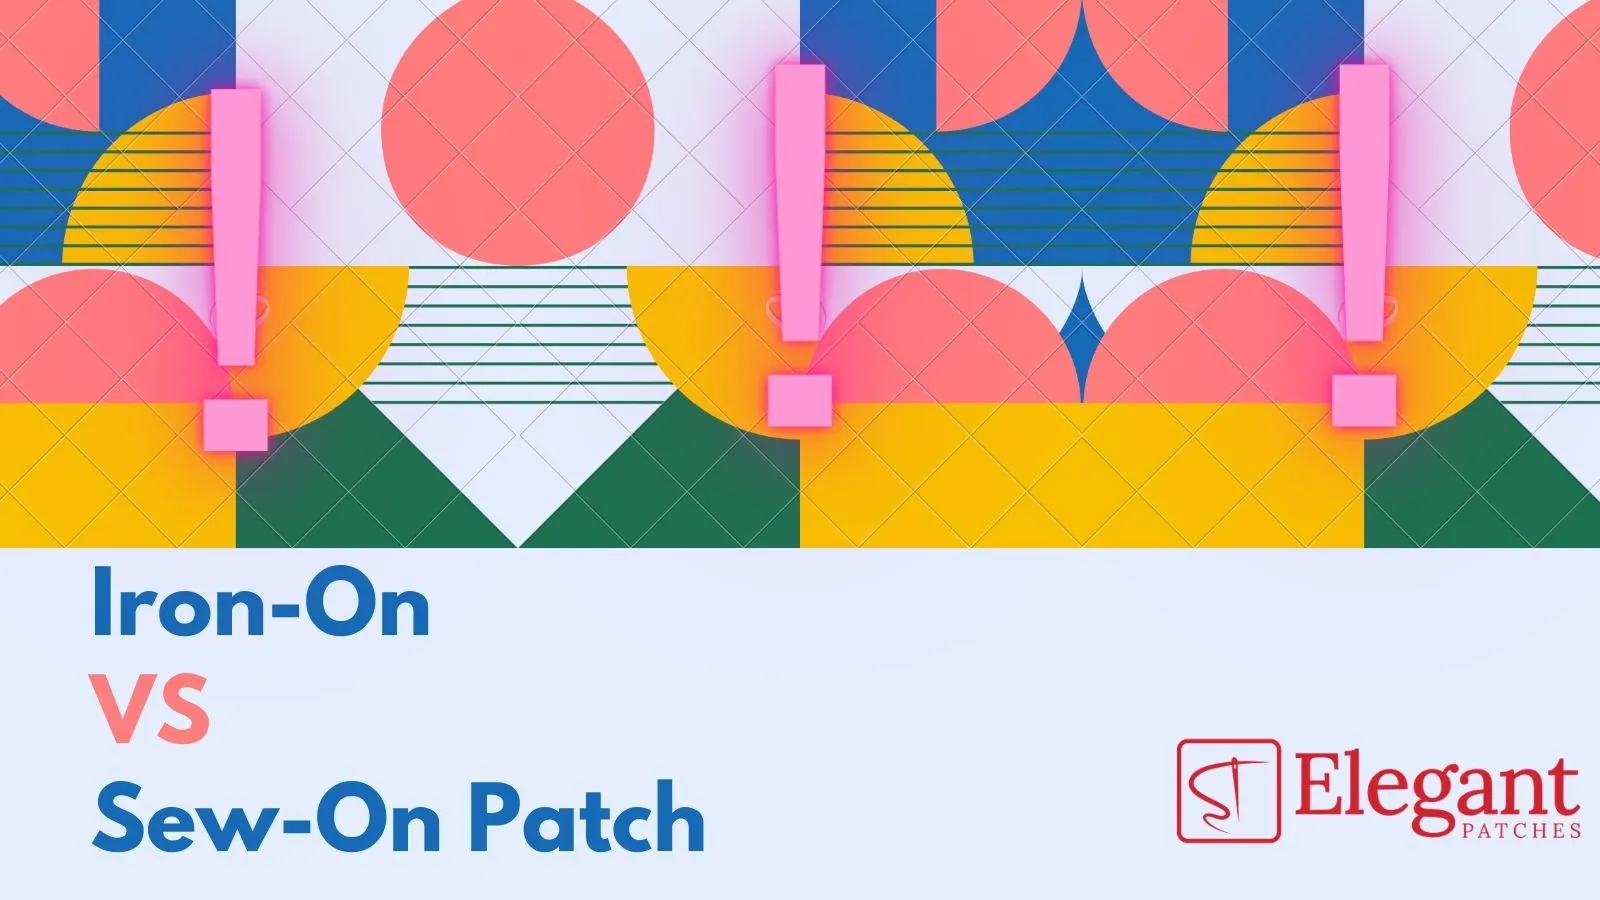 Image For Iron-On VS Sew-On Patch - Which One is More Effective?